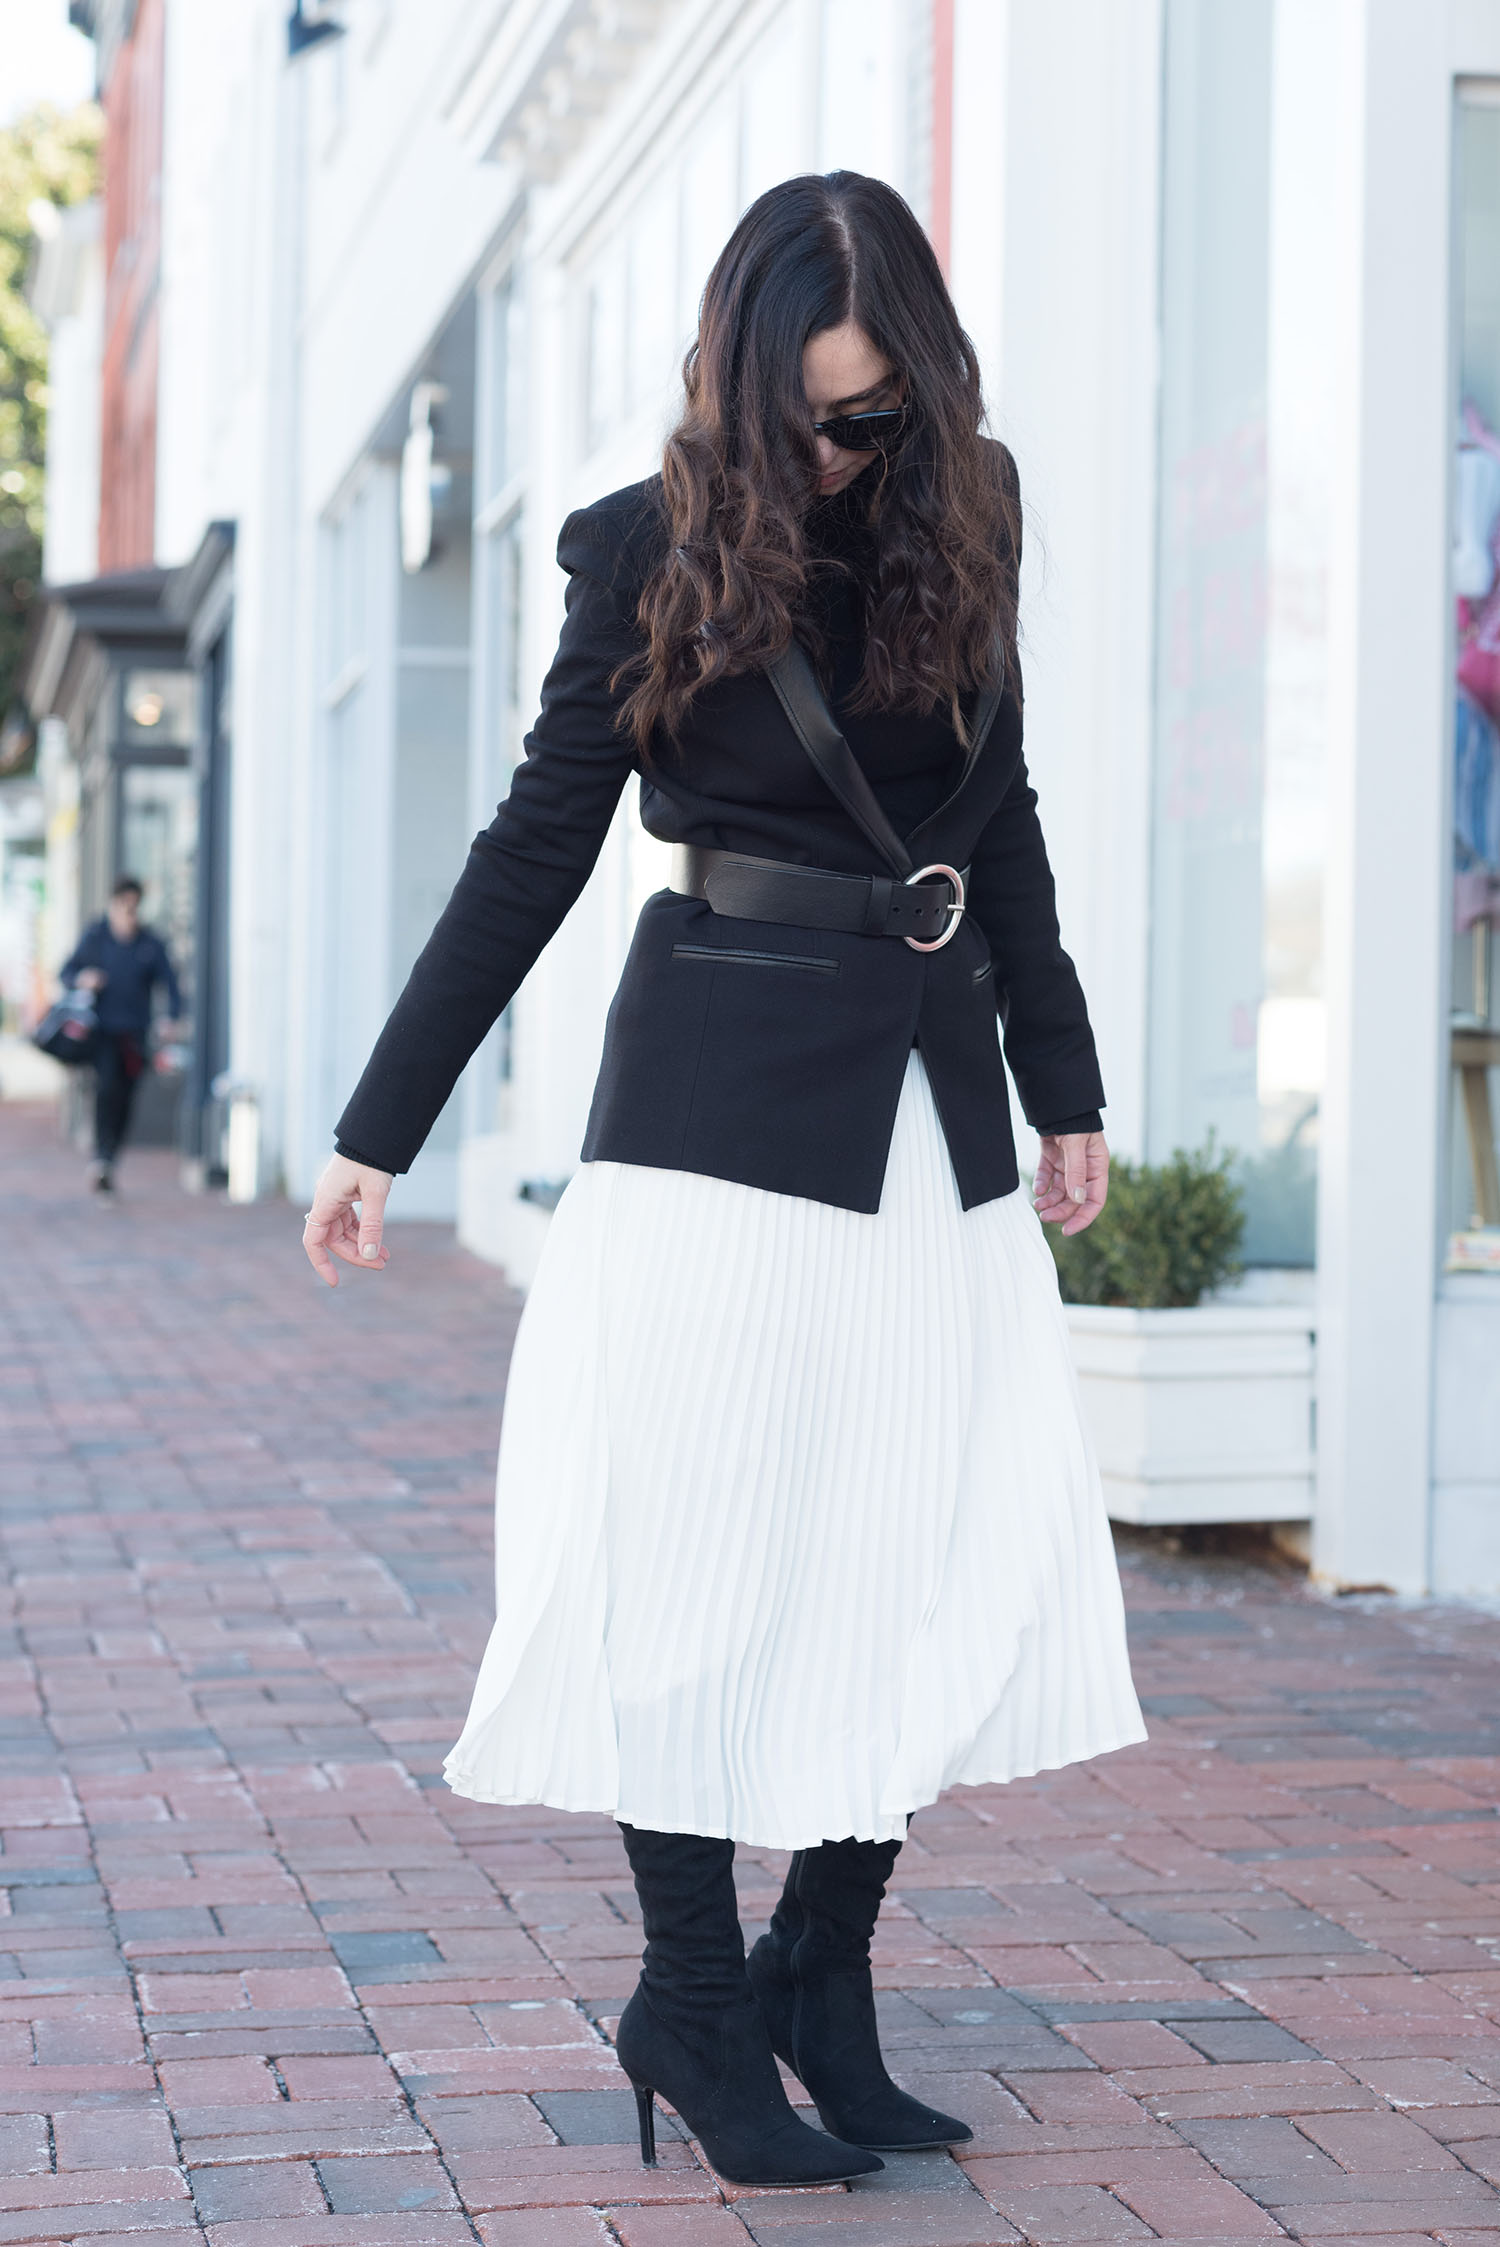 Canadian fashion blogger Cee Fardoe of Coco & Vera twirls in Washington DC wearing a white pleated skirt from Aritzia and a black Helmut Lang blazer